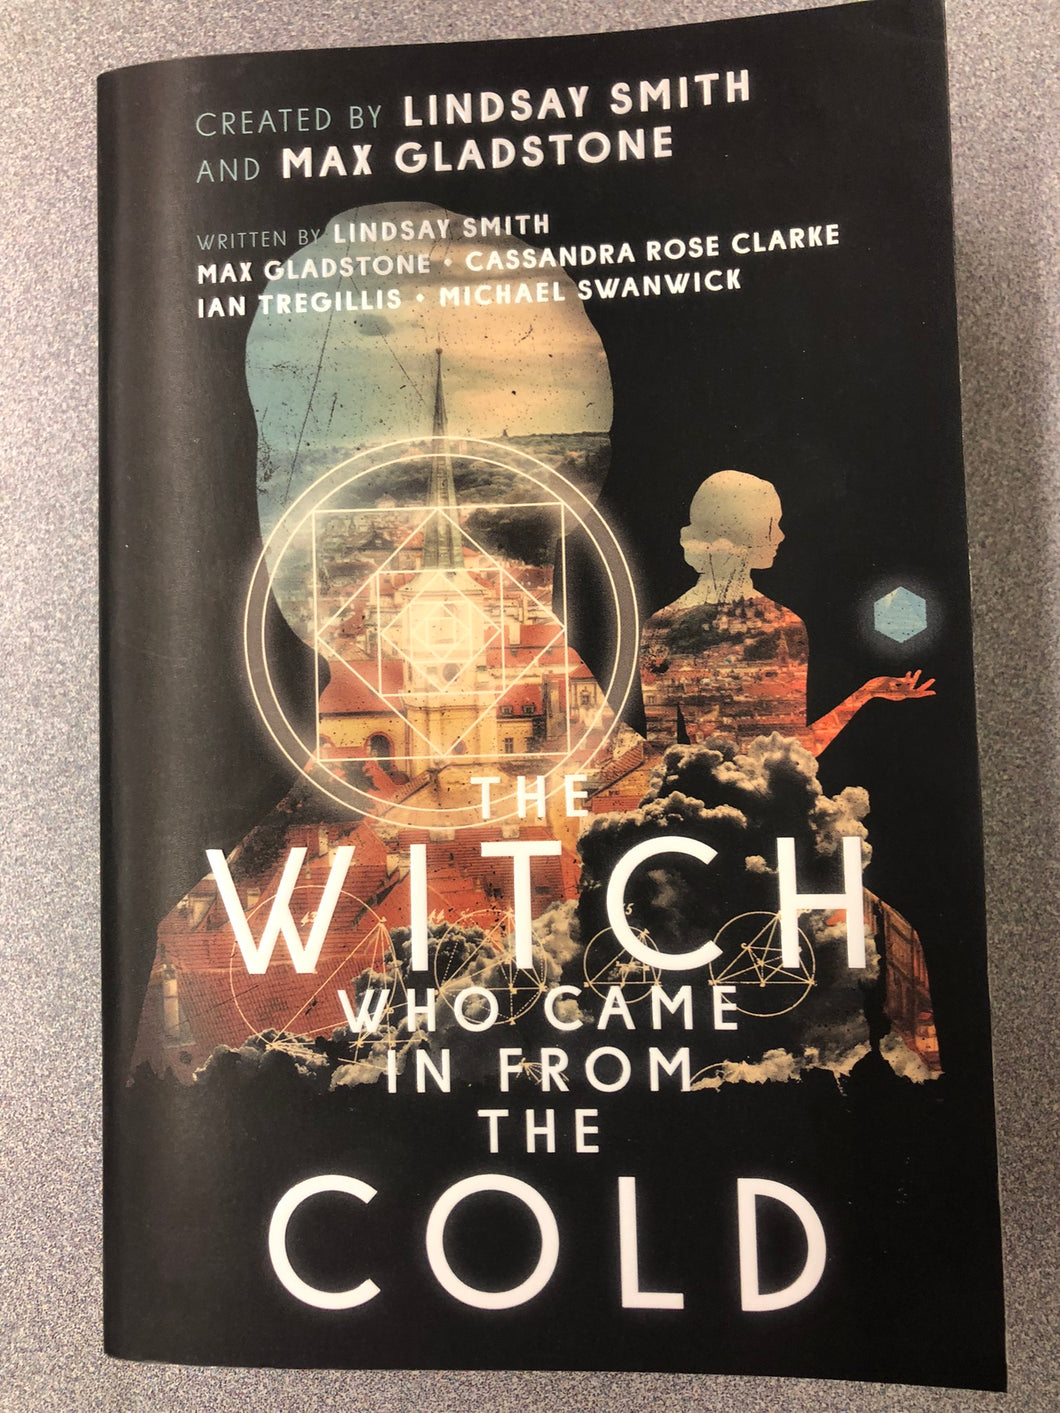 Smith, Lindsay, et al, The Witch Who Came in from the Cold, [2016] SF 8/22